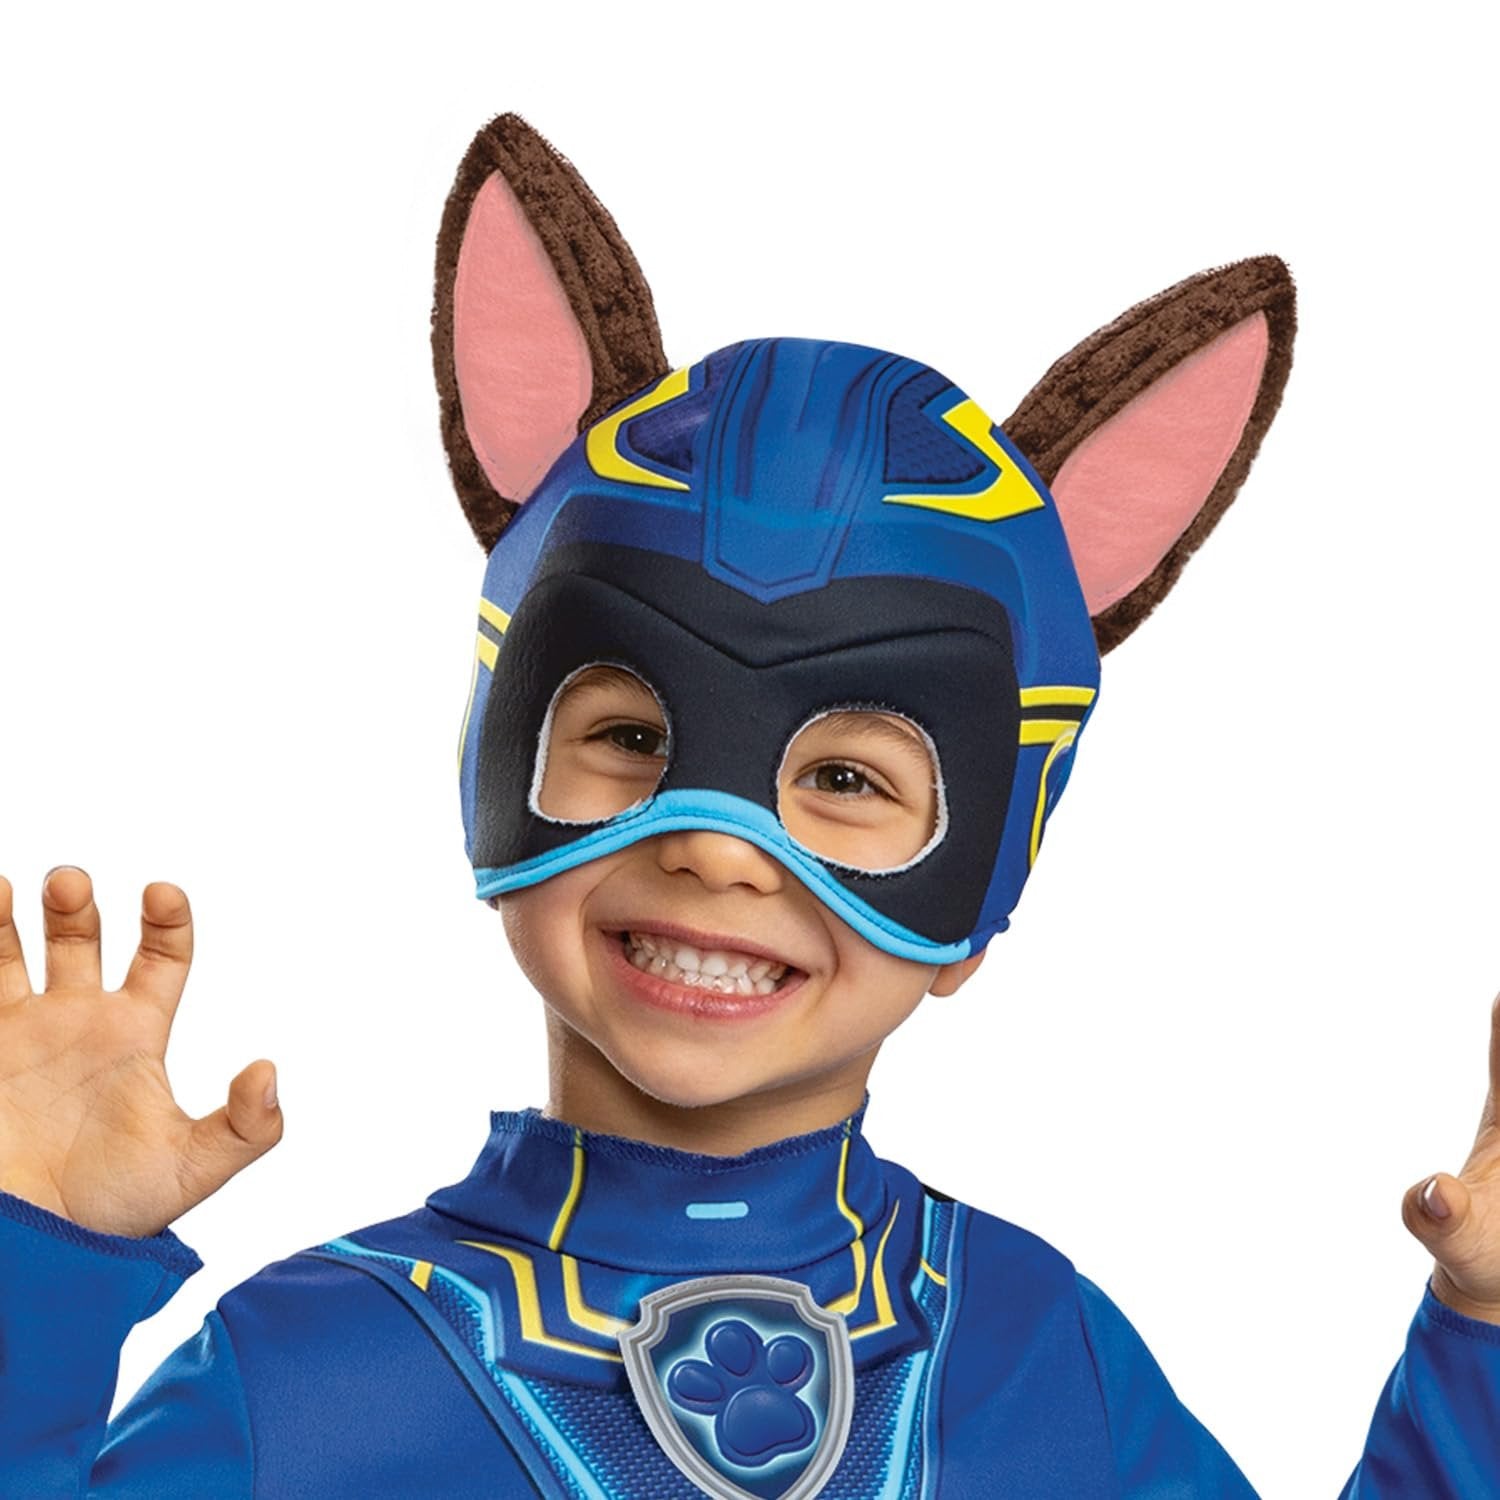 Chase Paw Patrol Costume, Official Toddler Paw Patrol Halloween Outfit with Headpiece for Kids, Size (3T-4T)